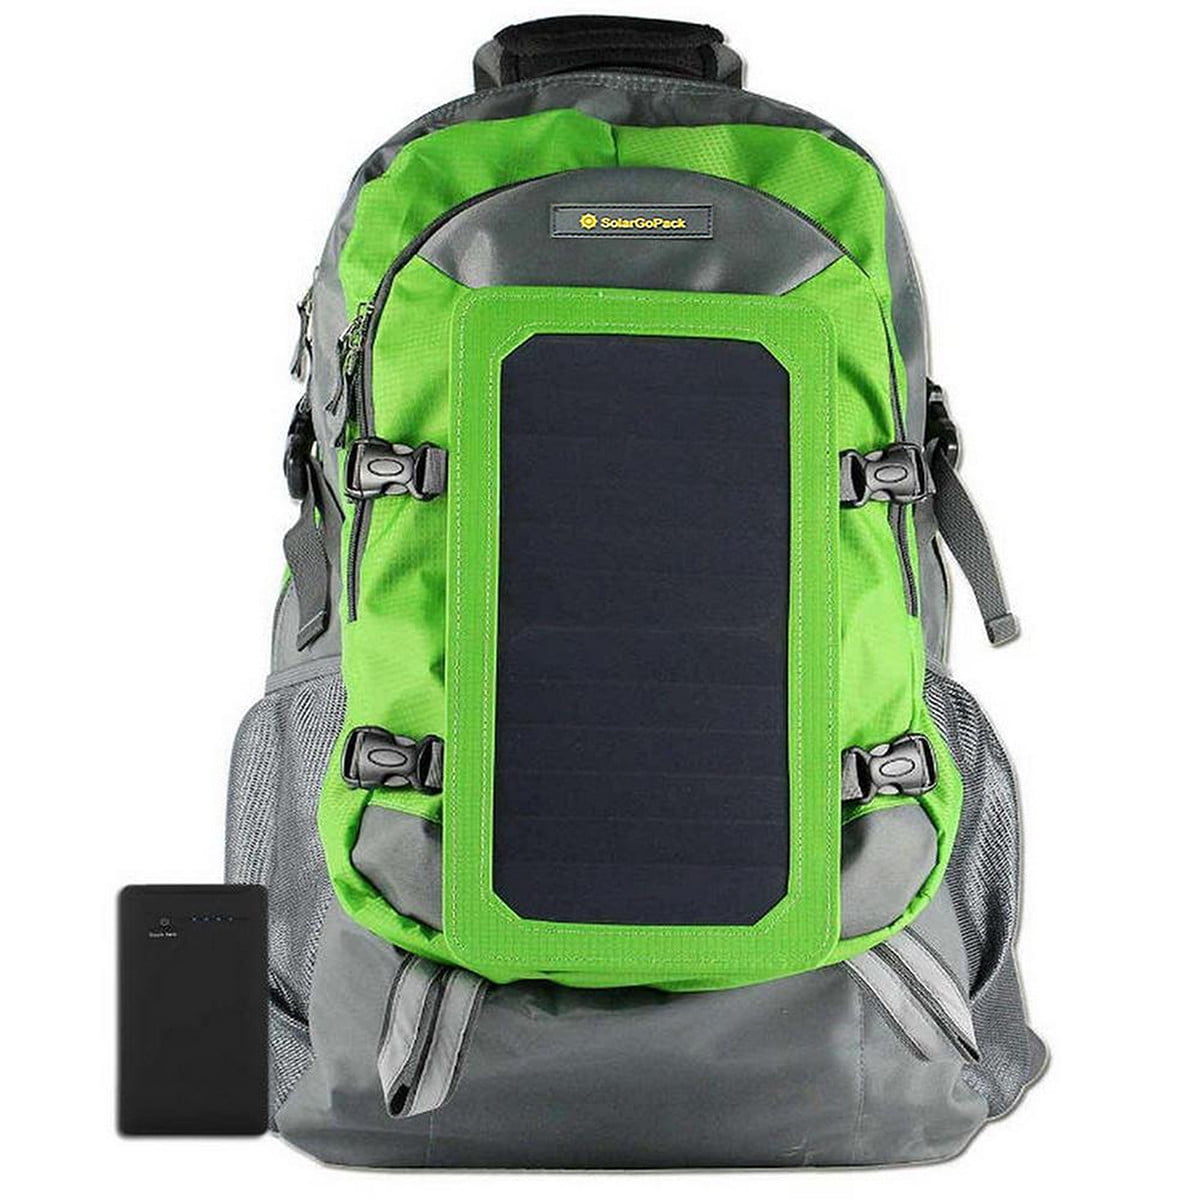 SolarGoPack Solar Powered Backpack / Light Green / 7 Watt Solar Panel and  10K mAh Charging Battery Daypack / Phone and Electronic Device Power  Charger 